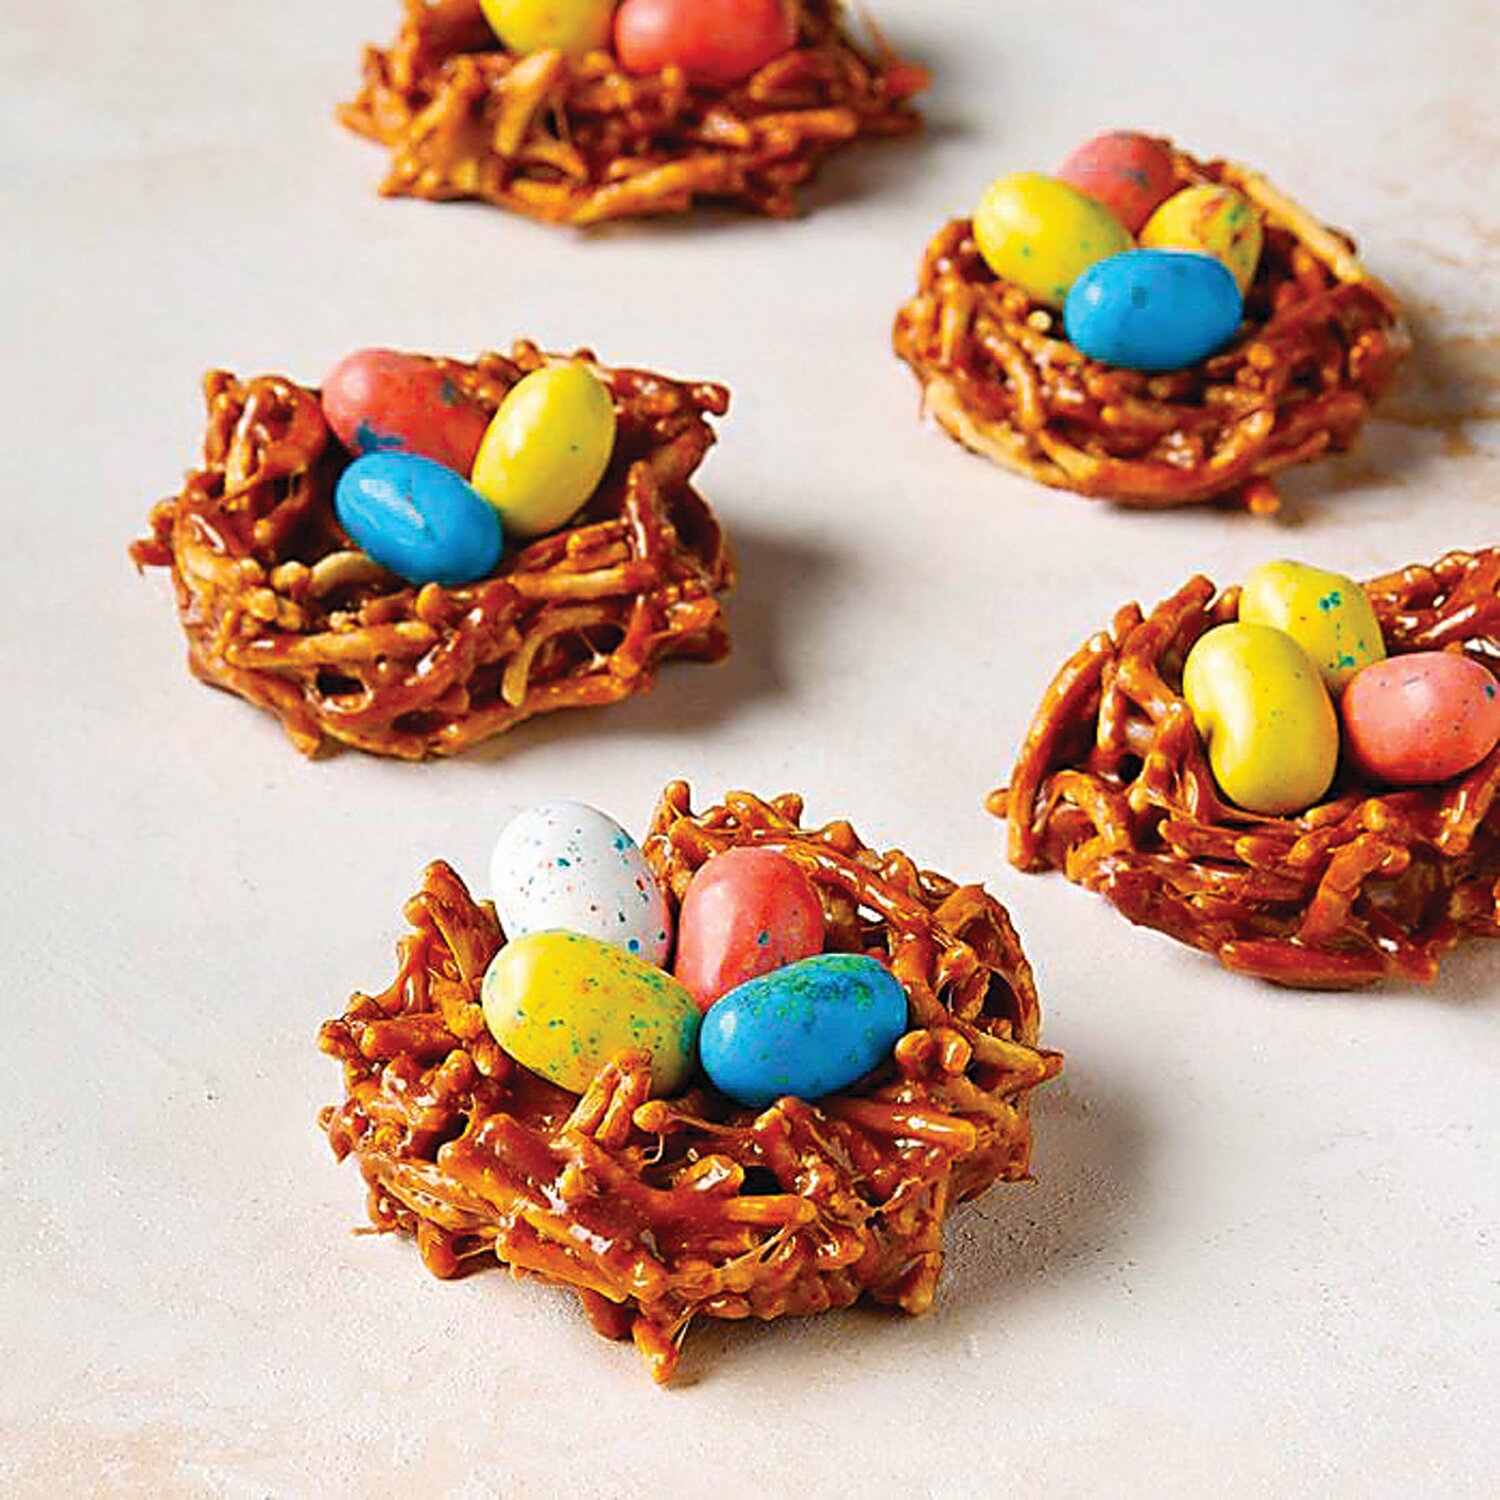 Chow mein noodles are the base of these nests.